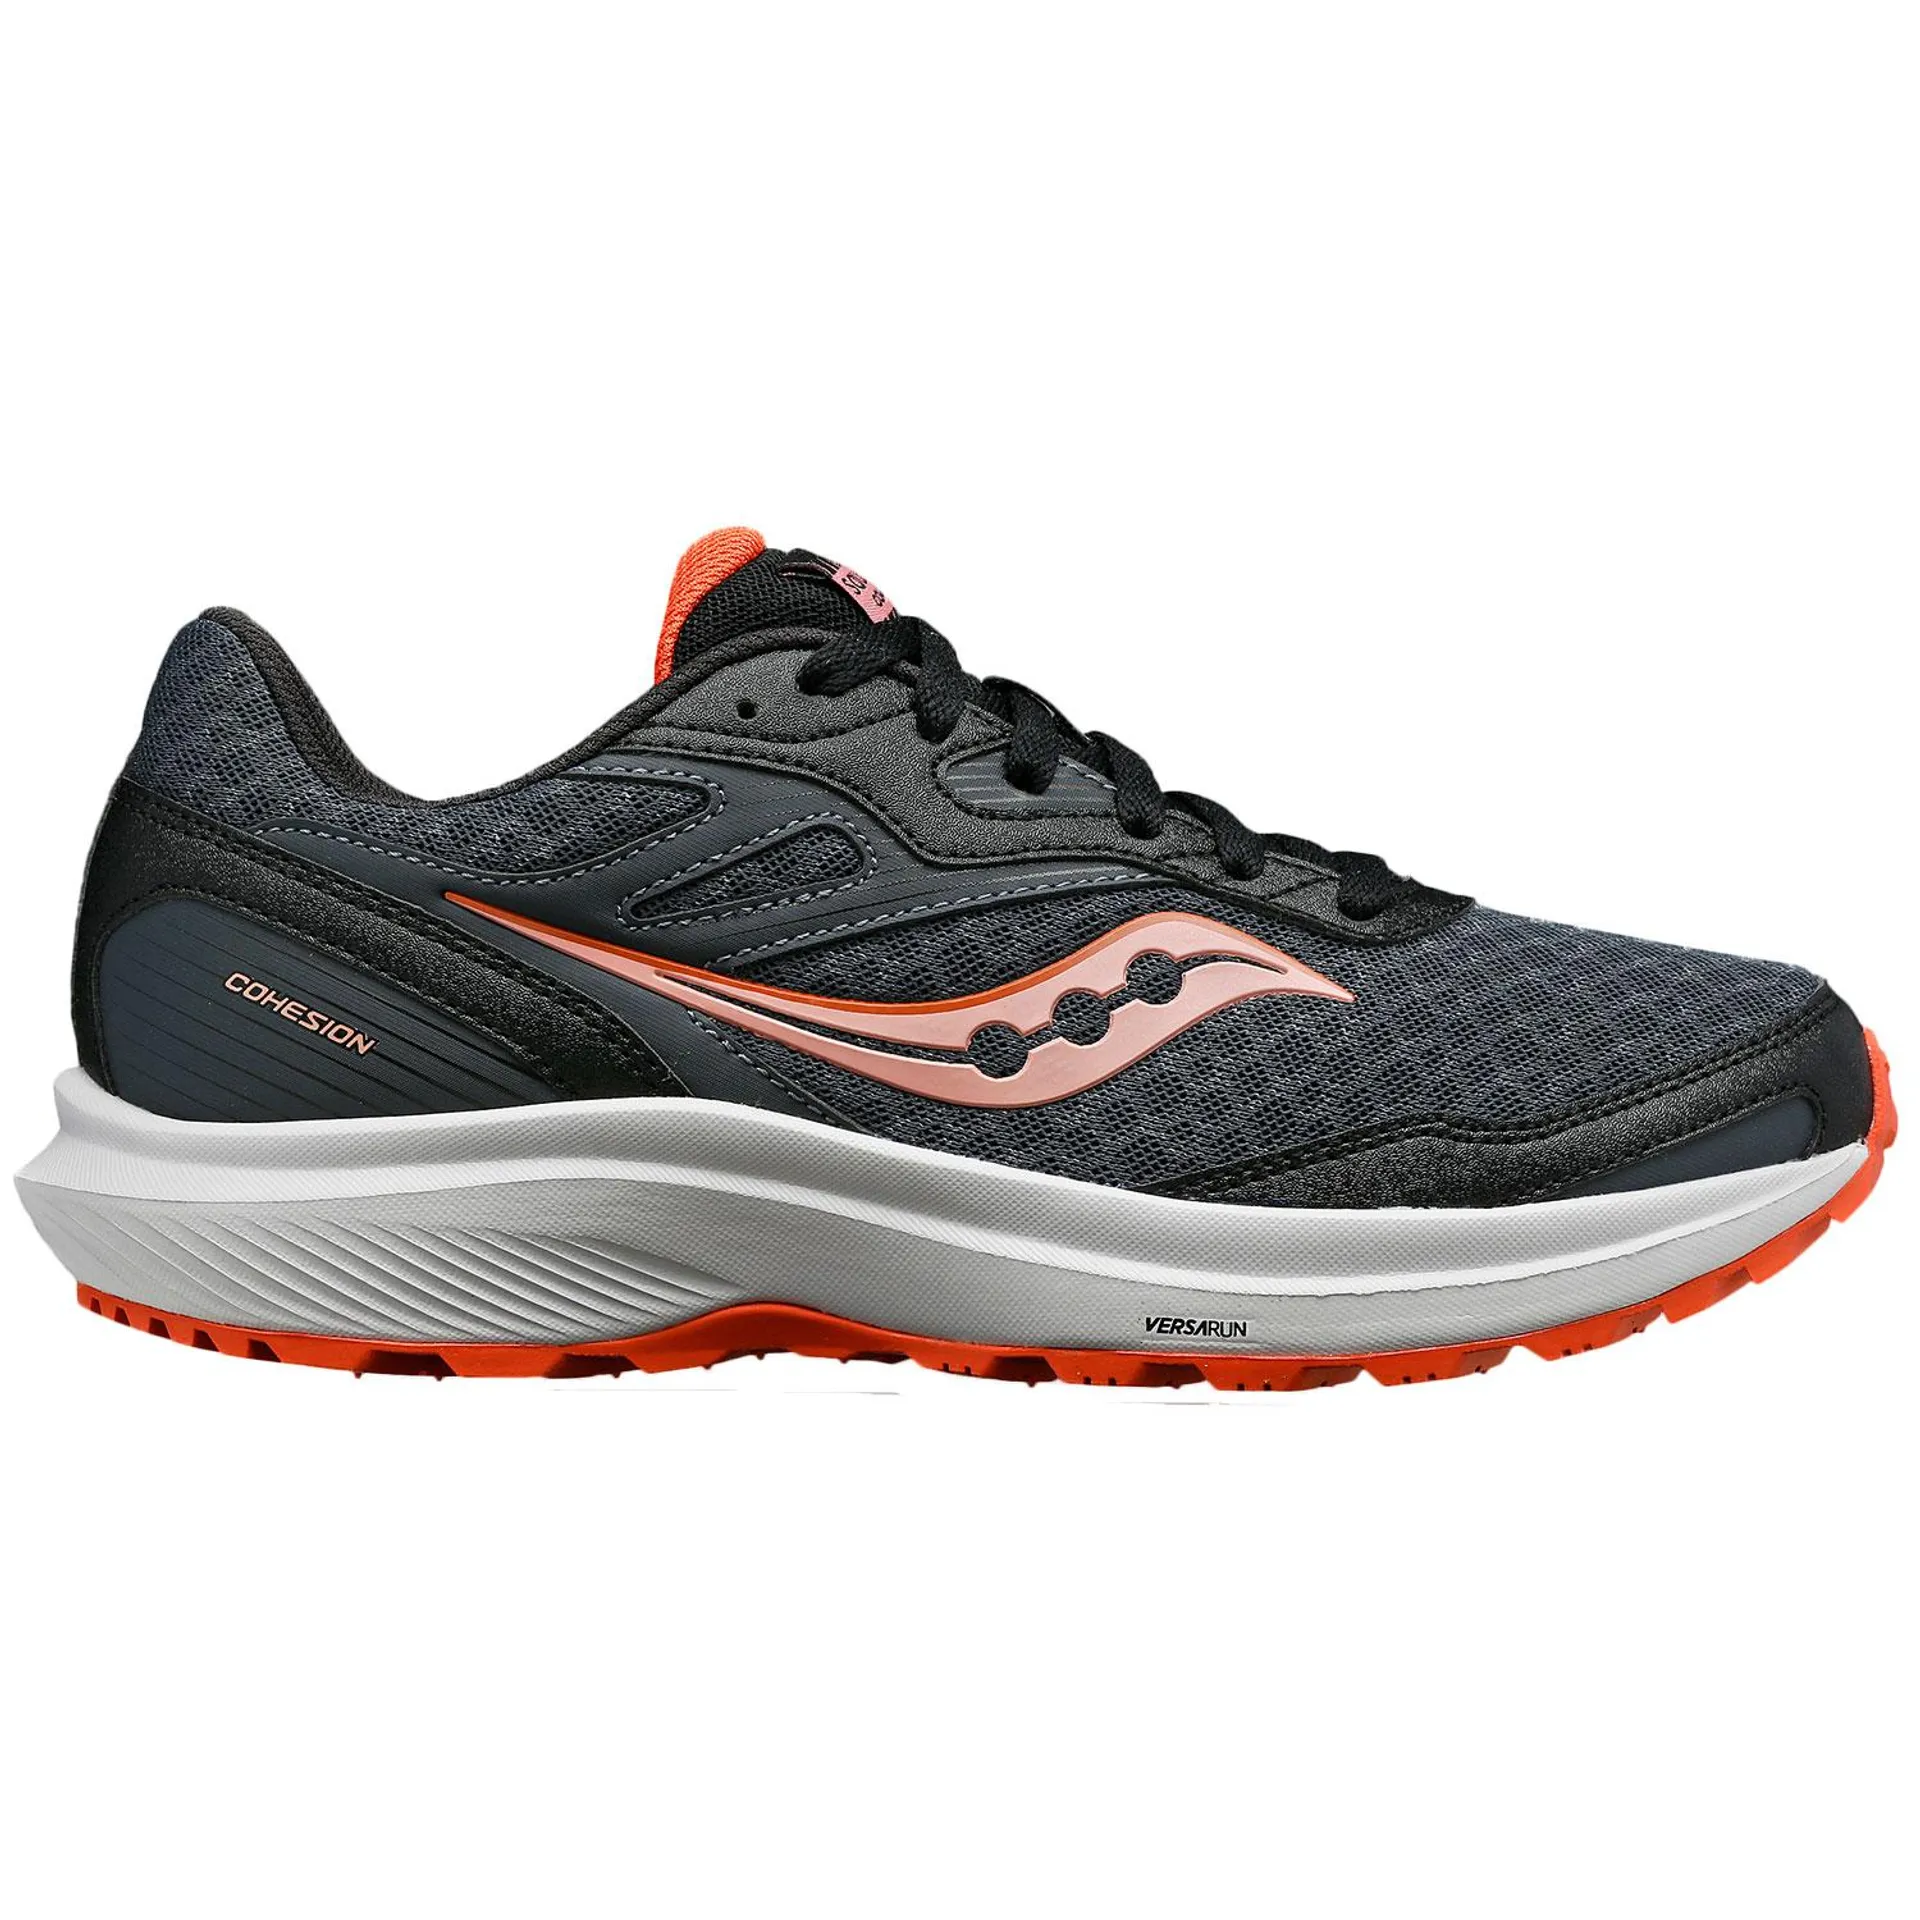 Saucony Cohesion TR16 Women's Running Shoes